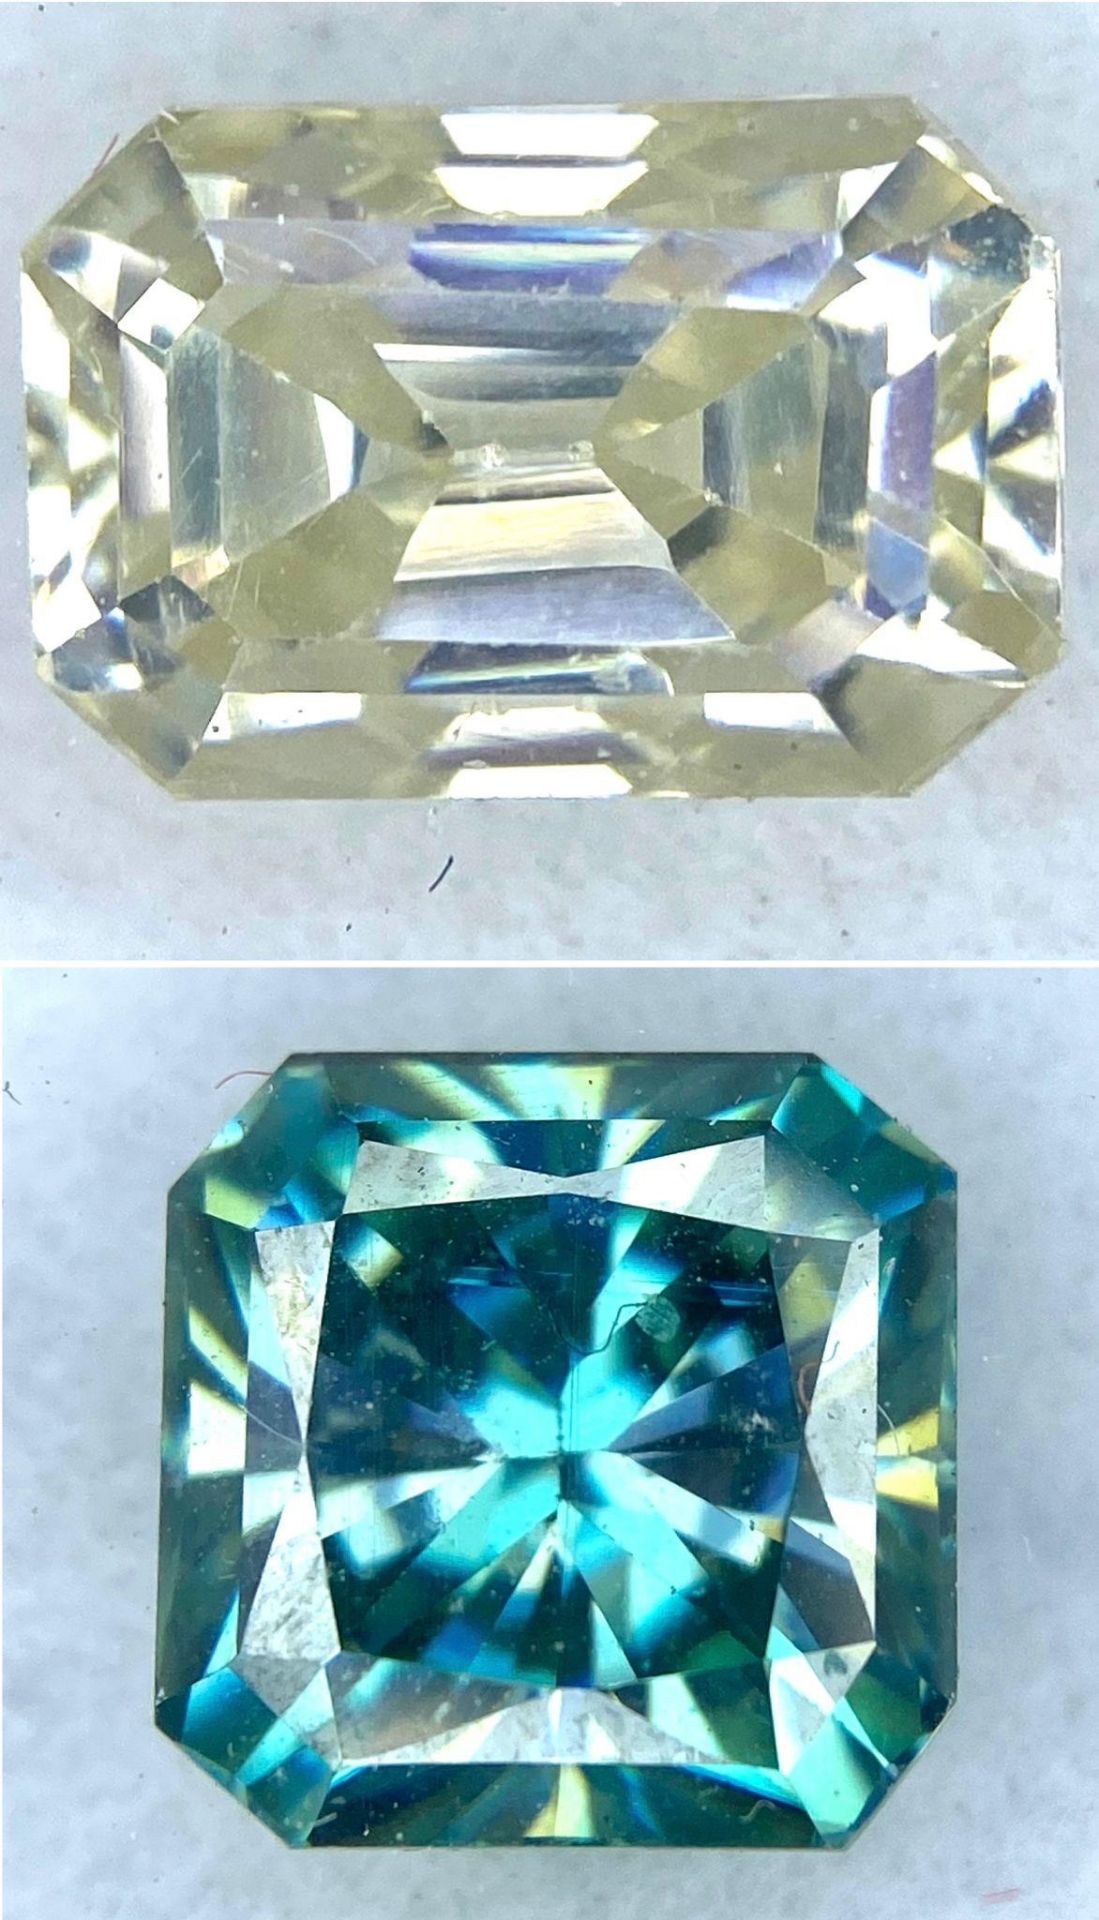 A Collection of 2 Moissanites Gemstones - 3.60ct blue and 2.840ct White Moissanite. Both with GLI